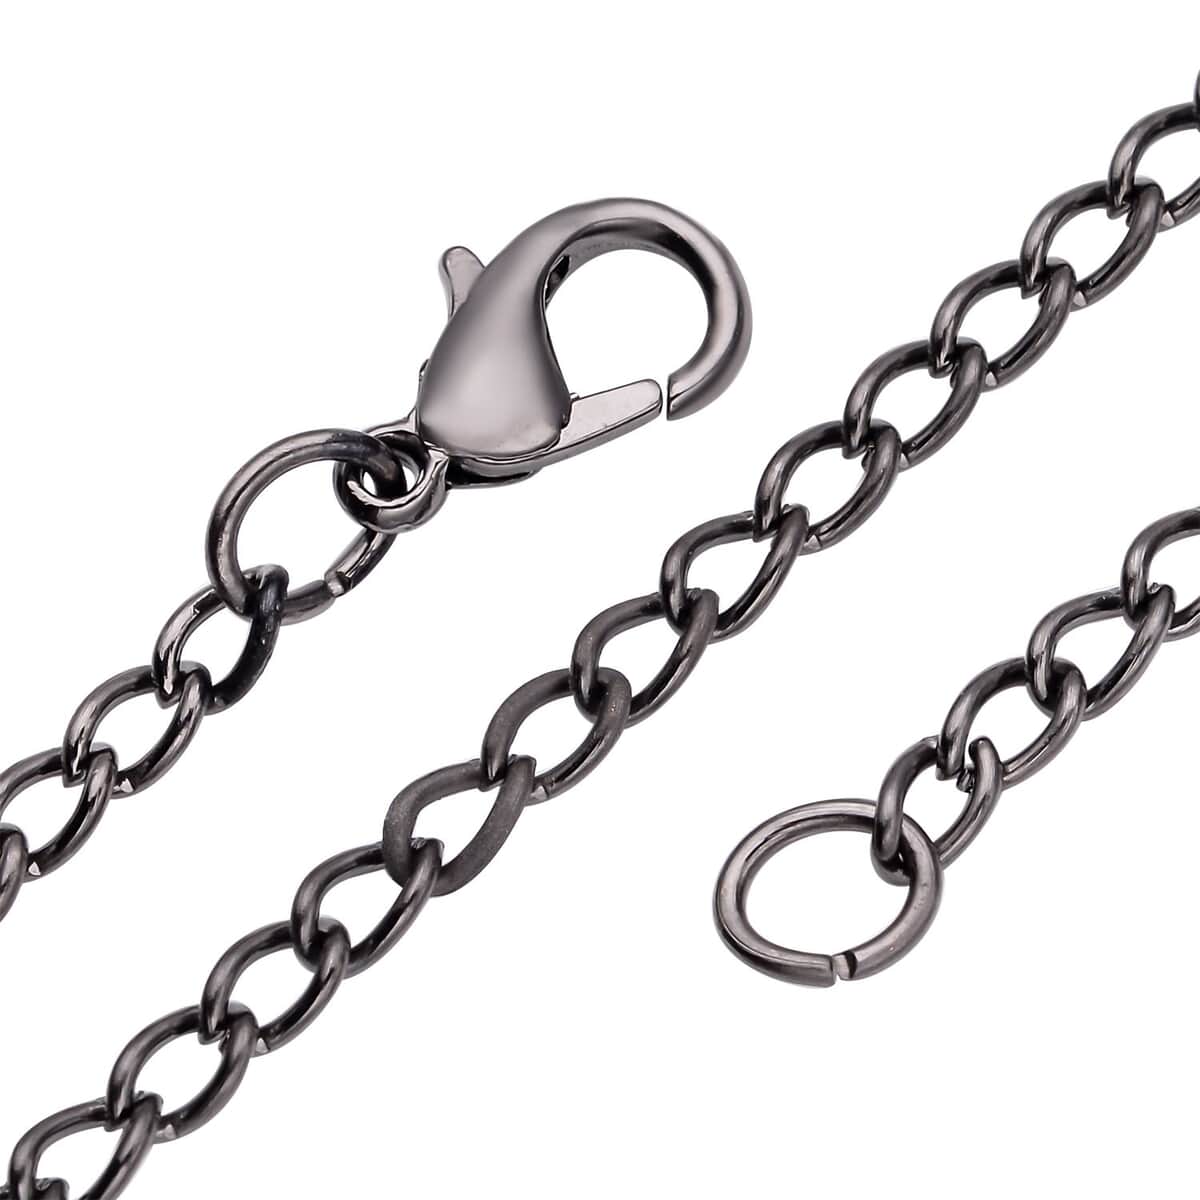 Strada Japanese Movement 3D Printing Ram Pattern Pocket Watch in ION Plated Black Stainless Steel Paper Clip Chain (28-31 Inches) image number 6